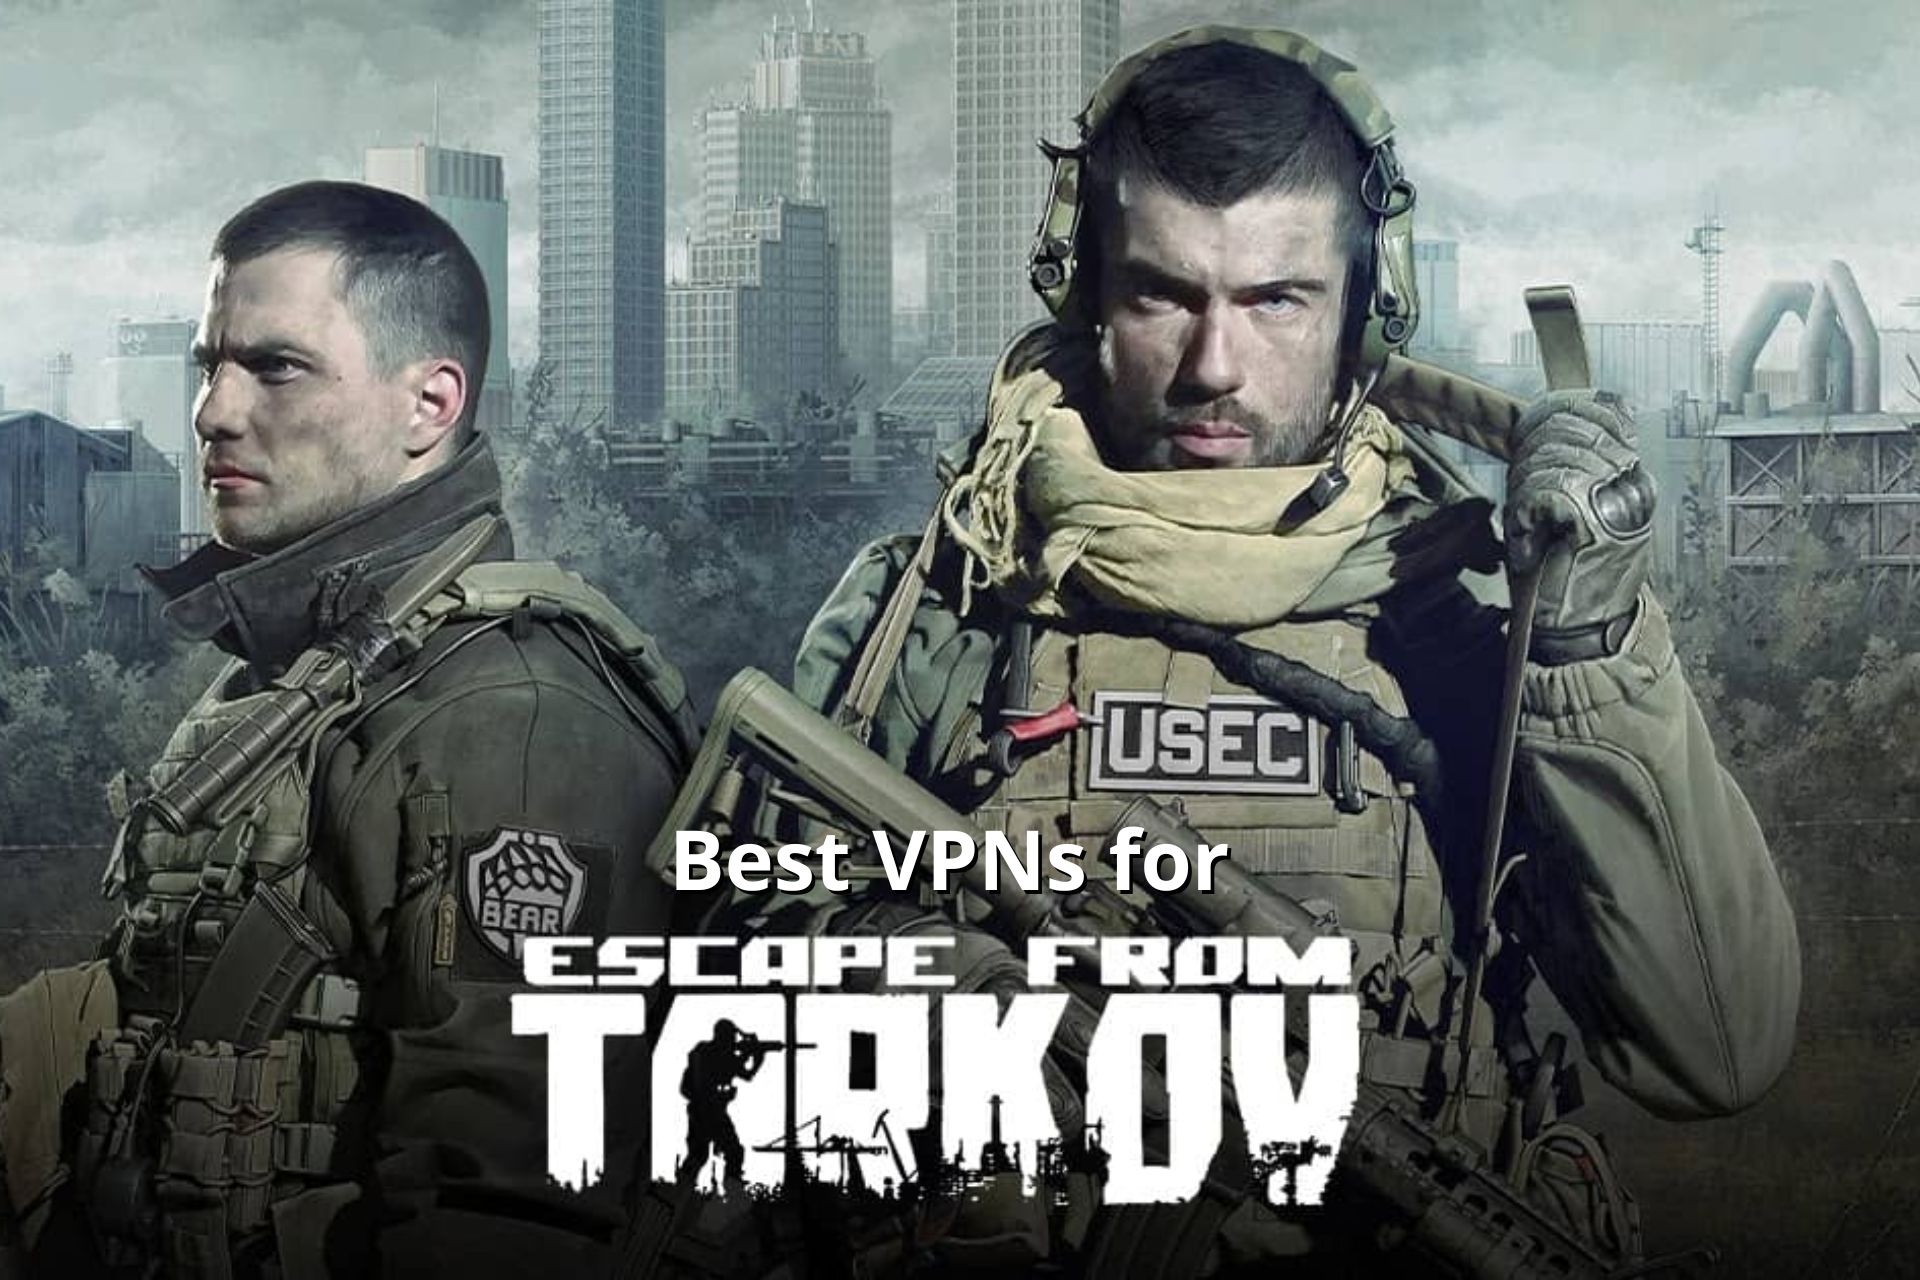 7 Best VPN Services for Escape from Tarkov to Change Region